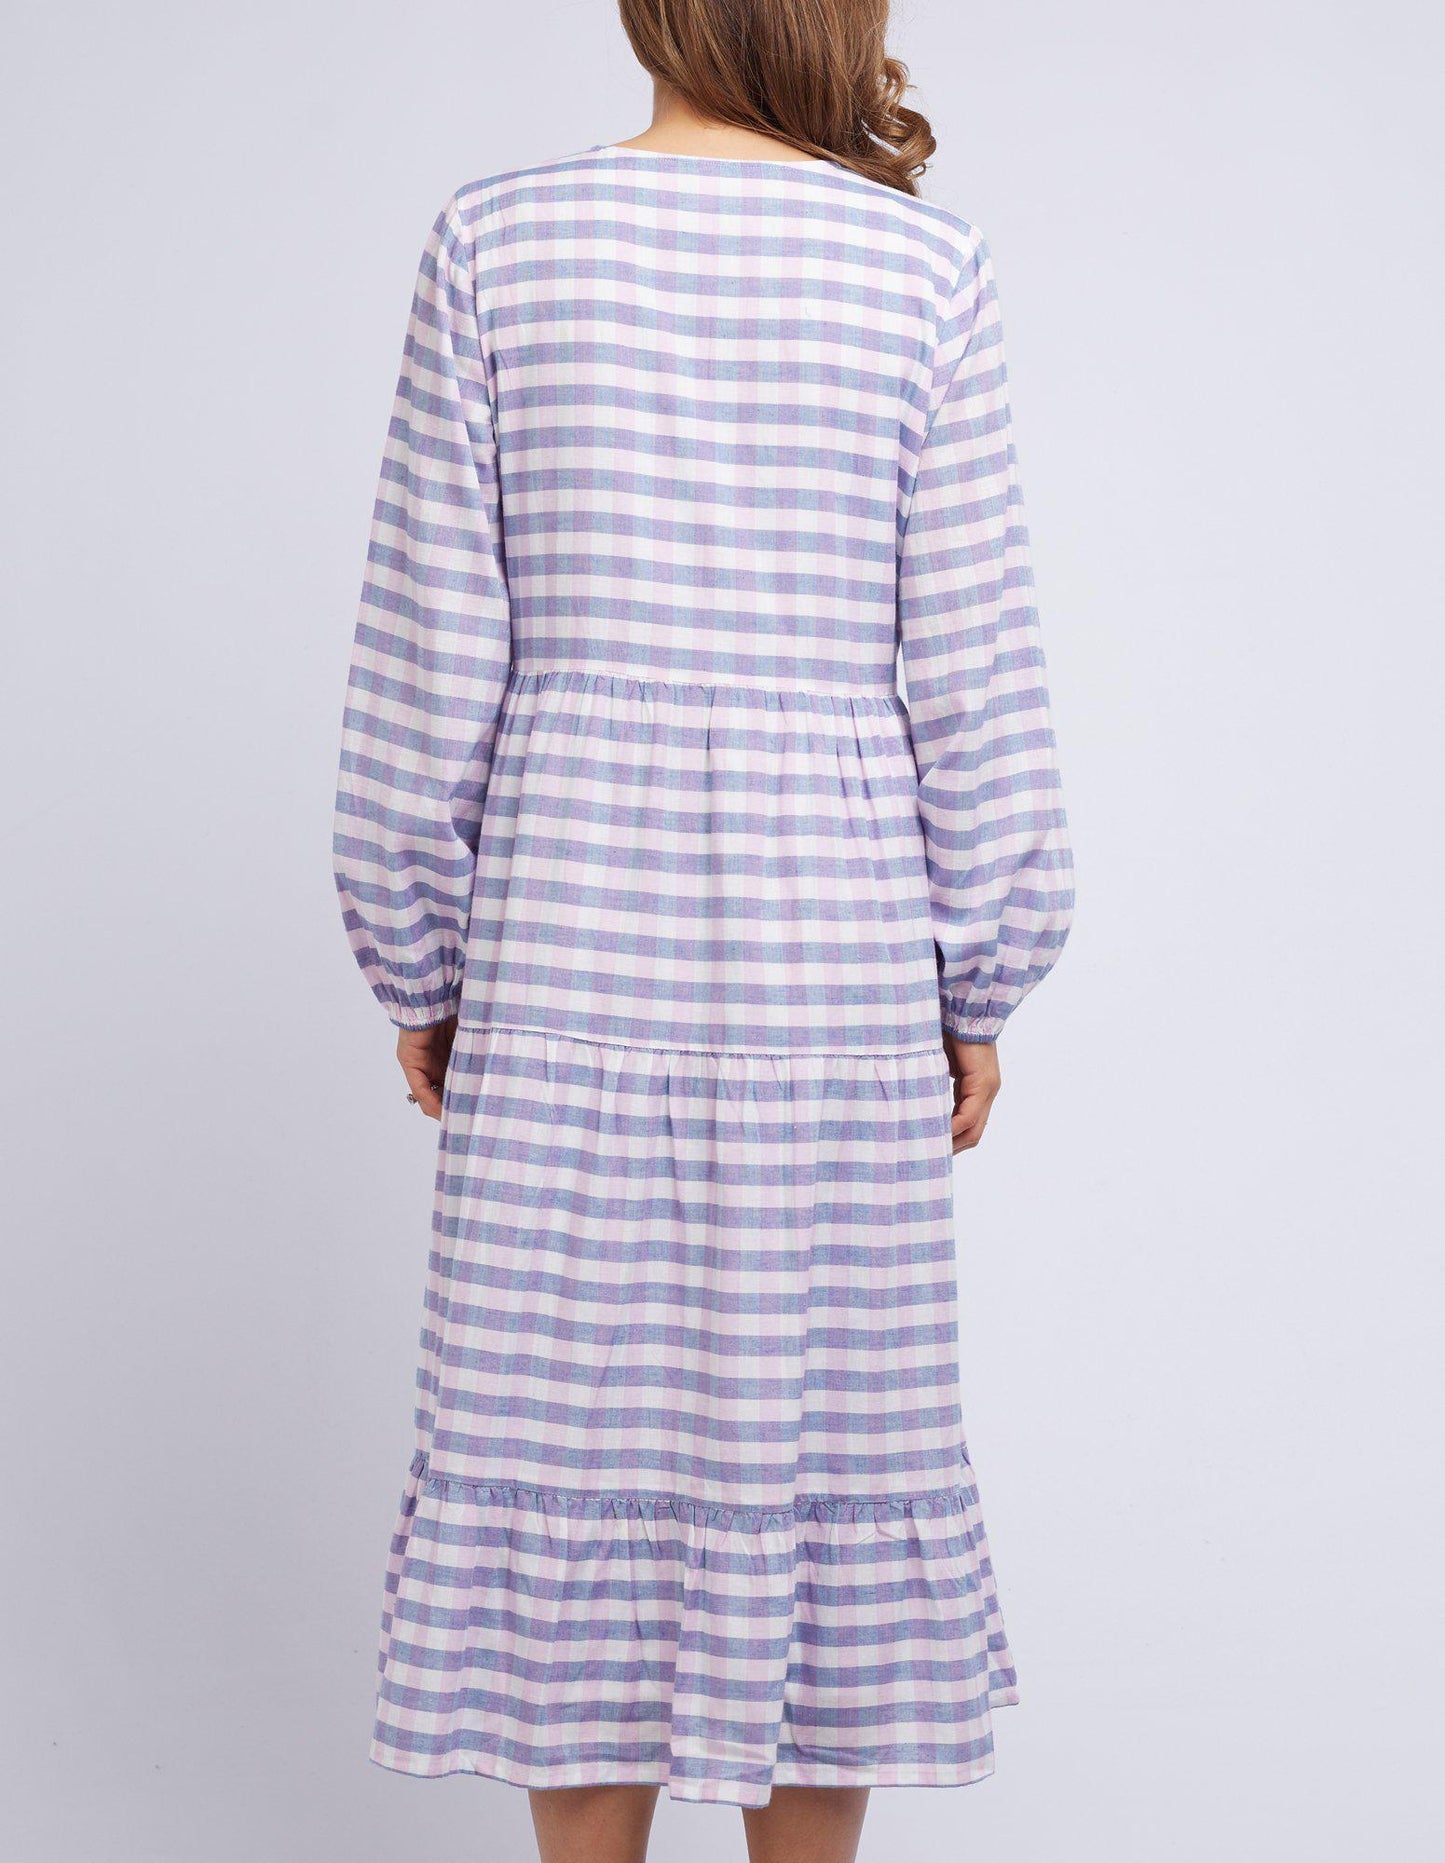 Gracie Gingham Dress - Pink And Blue Check - Elm Lifestyle - FUDGE Gifts Home Lifestyle